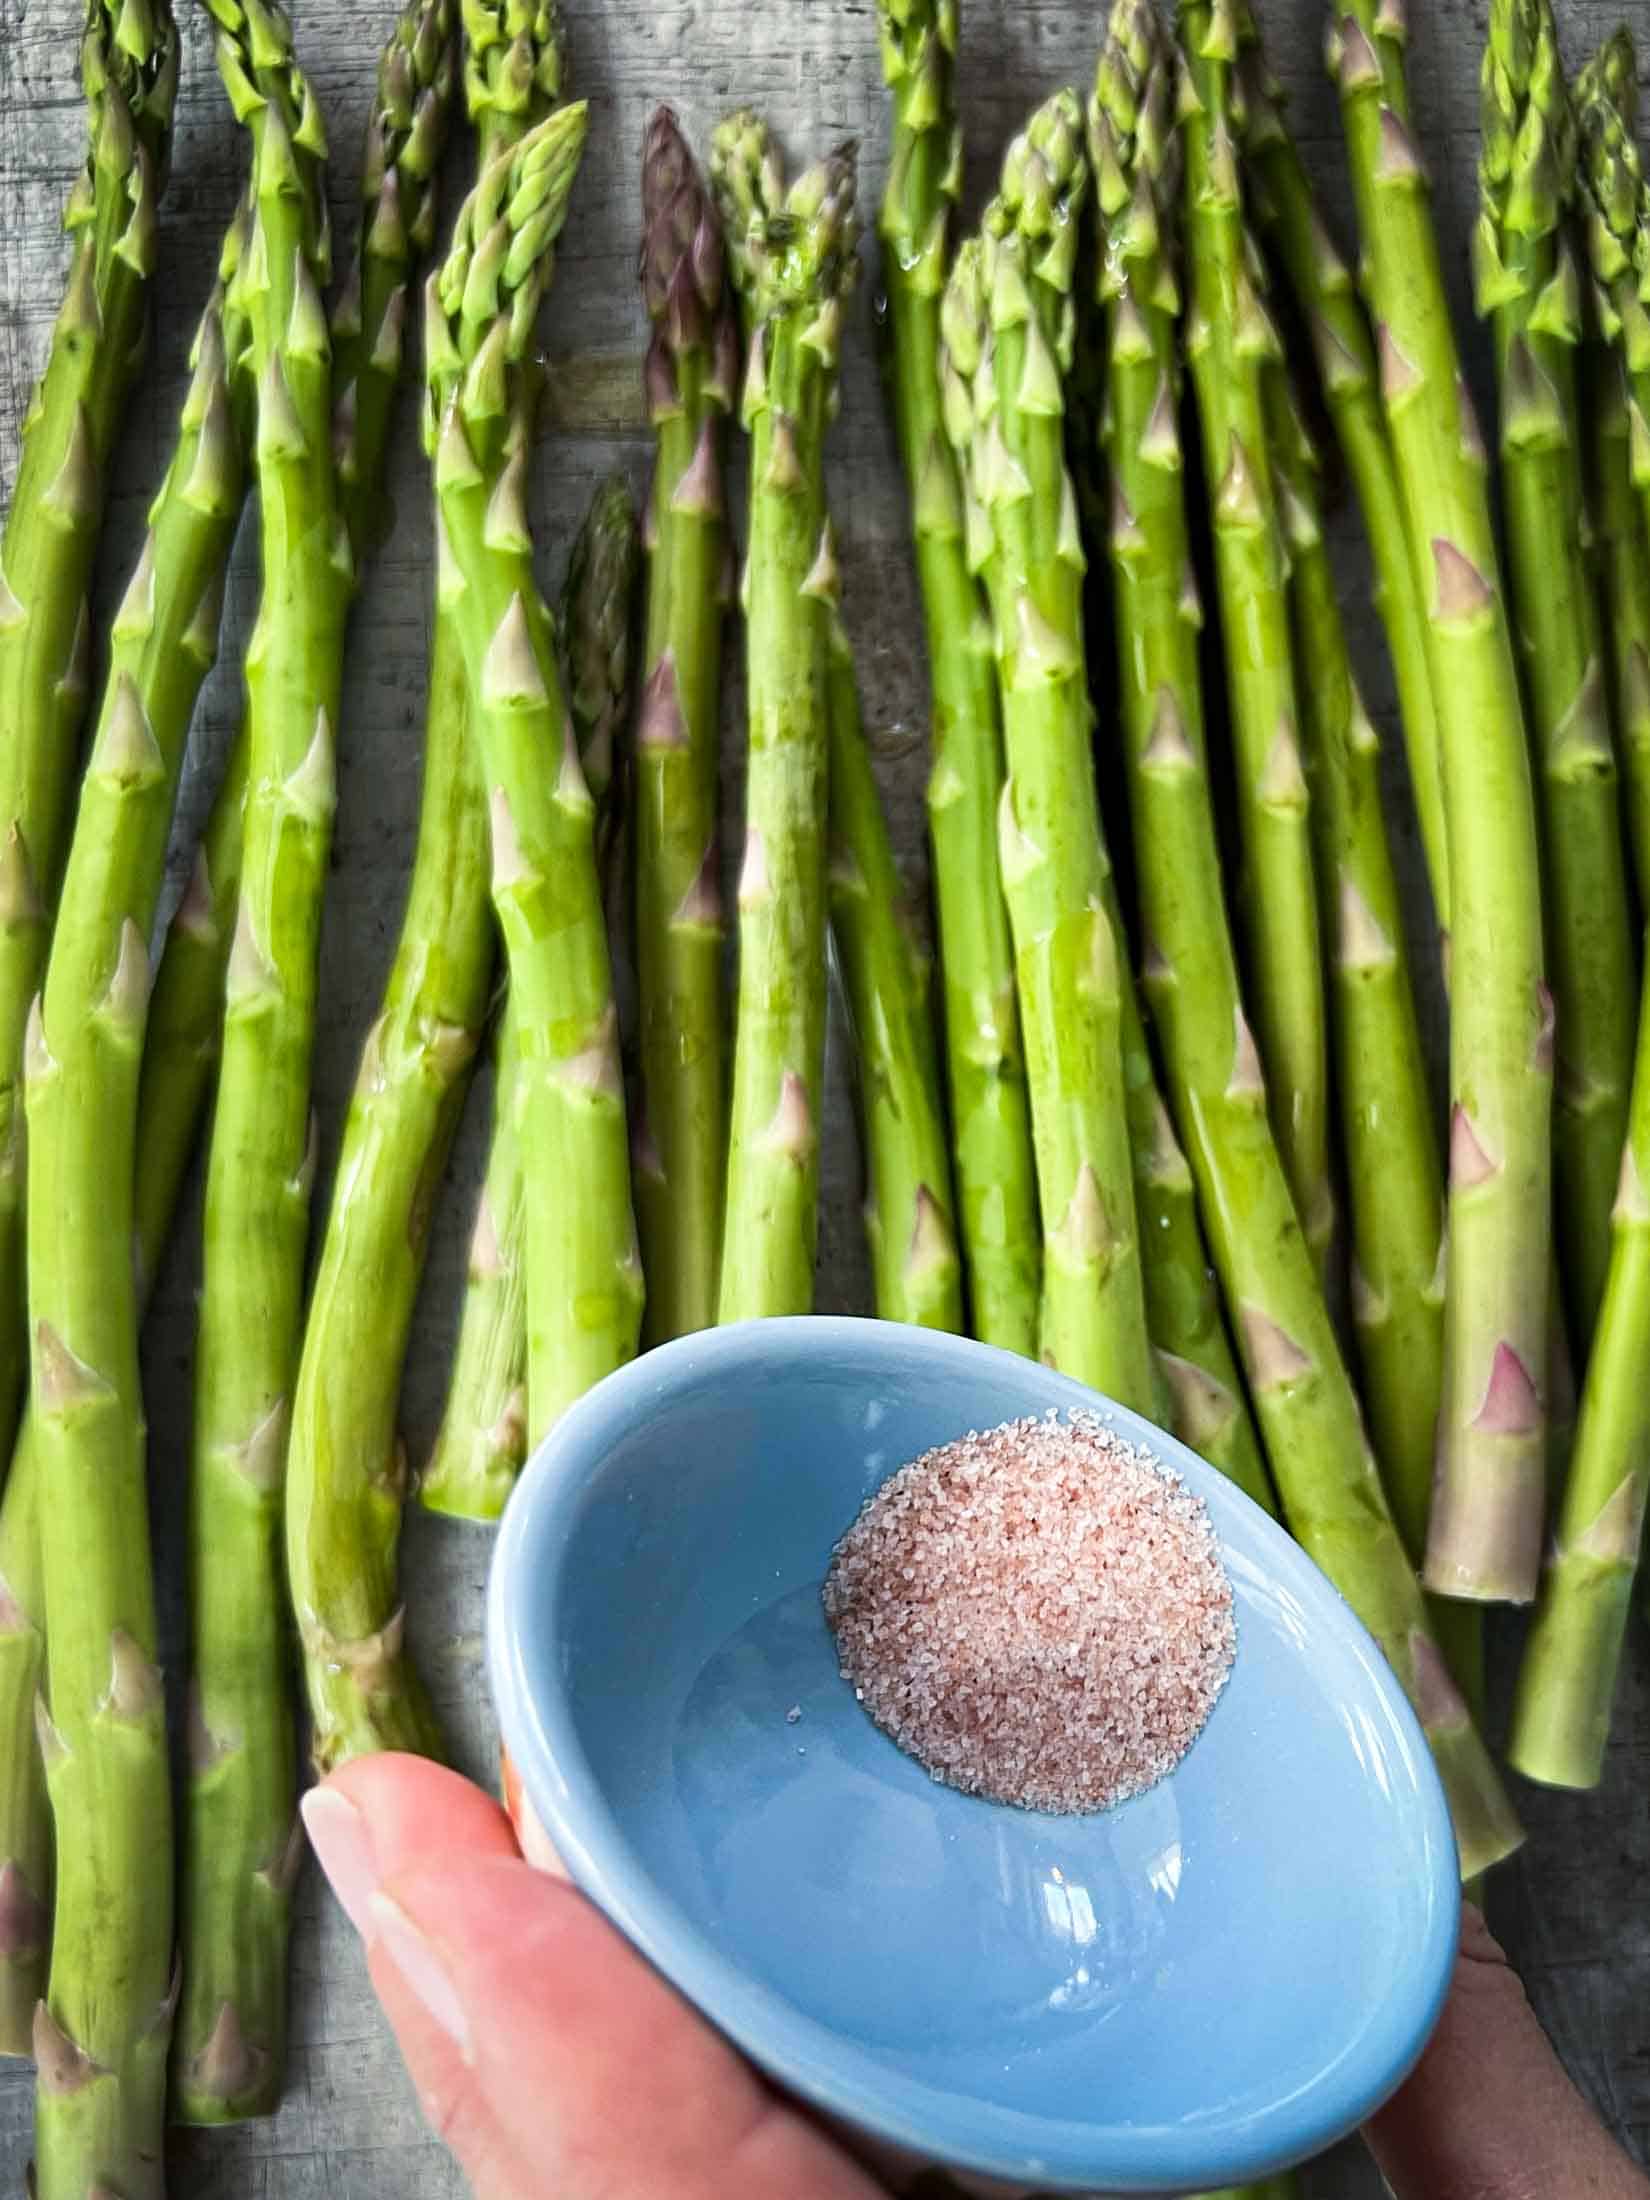 Salt being sprinkled onto asparagus spears before getting smoked.